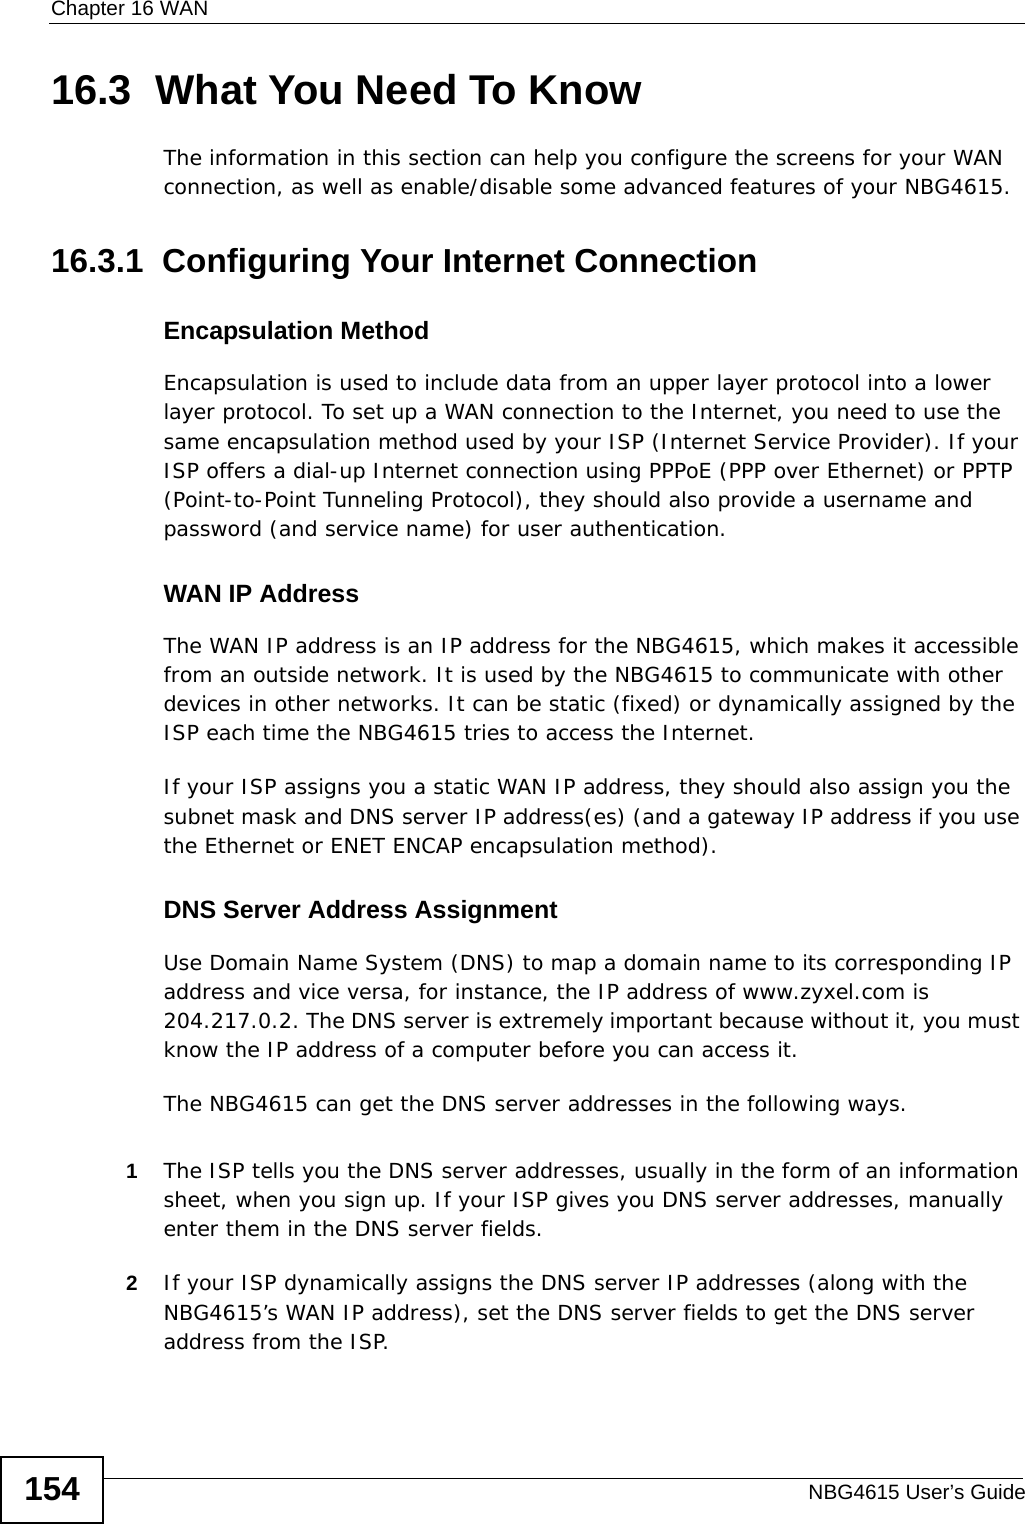 Chapter 16 WANNBG4615 User’s Guide15416.3  What You Need To KnowThe information in this section can help you configure the screens for your WAN connection, as well as enable/disable some advanced features of your NBG4615.16.3.1  Configuring Your Internet ConnectionEncapsulation MethodEncapsulation is used to include data from an upper layer protocol into a lower layer protocol. To set up a WAN connection to the Internet, you need to use the same encapsulation method used by your ISP (Internet Service Provider). If your ISP offers a dial-up Internet connection using PPPoE (PPP over Ethernet) or PPTP (Point-to-Point Tunneling Protocol), they should also provide a username and password (and service name) for user authentication.WAN IP AddressThe WAN IP address is an IP address for the NBG4615, which makes it accessible from an outside network. It is used by the NBG4615 to communicate with other devices in other networks. It can be static (fixed) or dynamically assigned by the ISP each time the NBG4615 tries to access the Internet.If your ISP assigns you a static WAN IP address, they should also assign you the subnet mask and DNS server IP address(es) (and a gateway IP address if you use the Ethernet or ENET ENCAP encapsulation method).DNS Server Address AssignmentUse Domain Name System (DNS) to map a domain name to its corresponding IP address and vice versa, for instance, the IP address of www.zyxel.com is 204.217.0.2. The DNS server is extremely important because without it, you must know the IP address of a computer before you can access it. The NBG4615 can get the DNS server addresses in the following ways.1The ISP tells you the DNS server addresses, usually in the form of an information sheet, when you sign up. If your ISP gives you DNS server addresses, manually enter them in the DNS server fields.2If your ISP dynamically assigns the DNS server IP addresses (along with the NBG4615’s WAN IP address), set the DNS server fields to get the DNS server address from the ISP. 